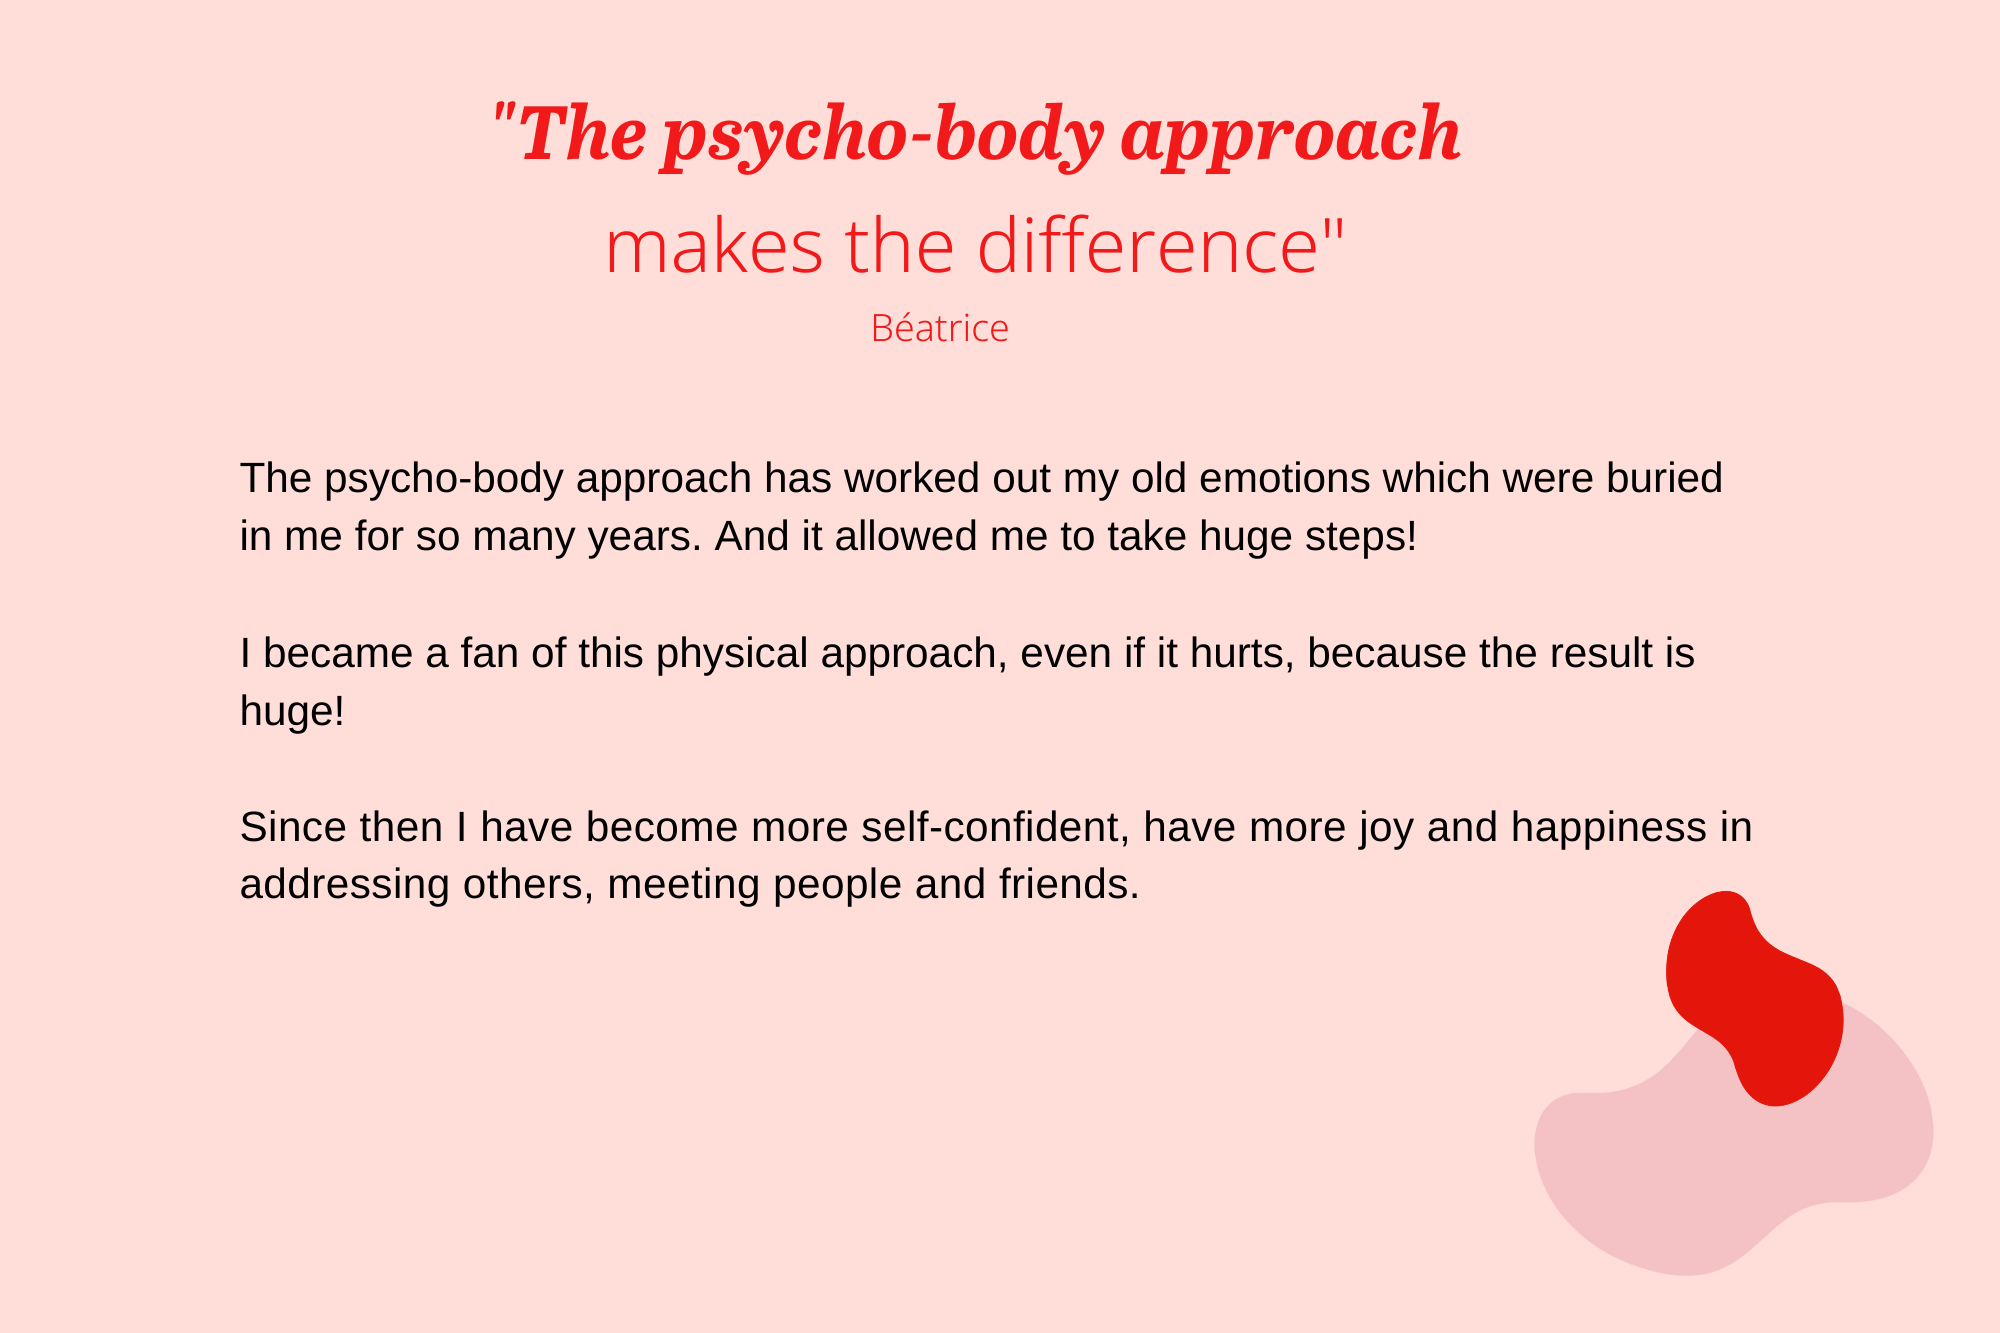 EN_Testimonials_lovecoach_The psycho-body approach makes the difference